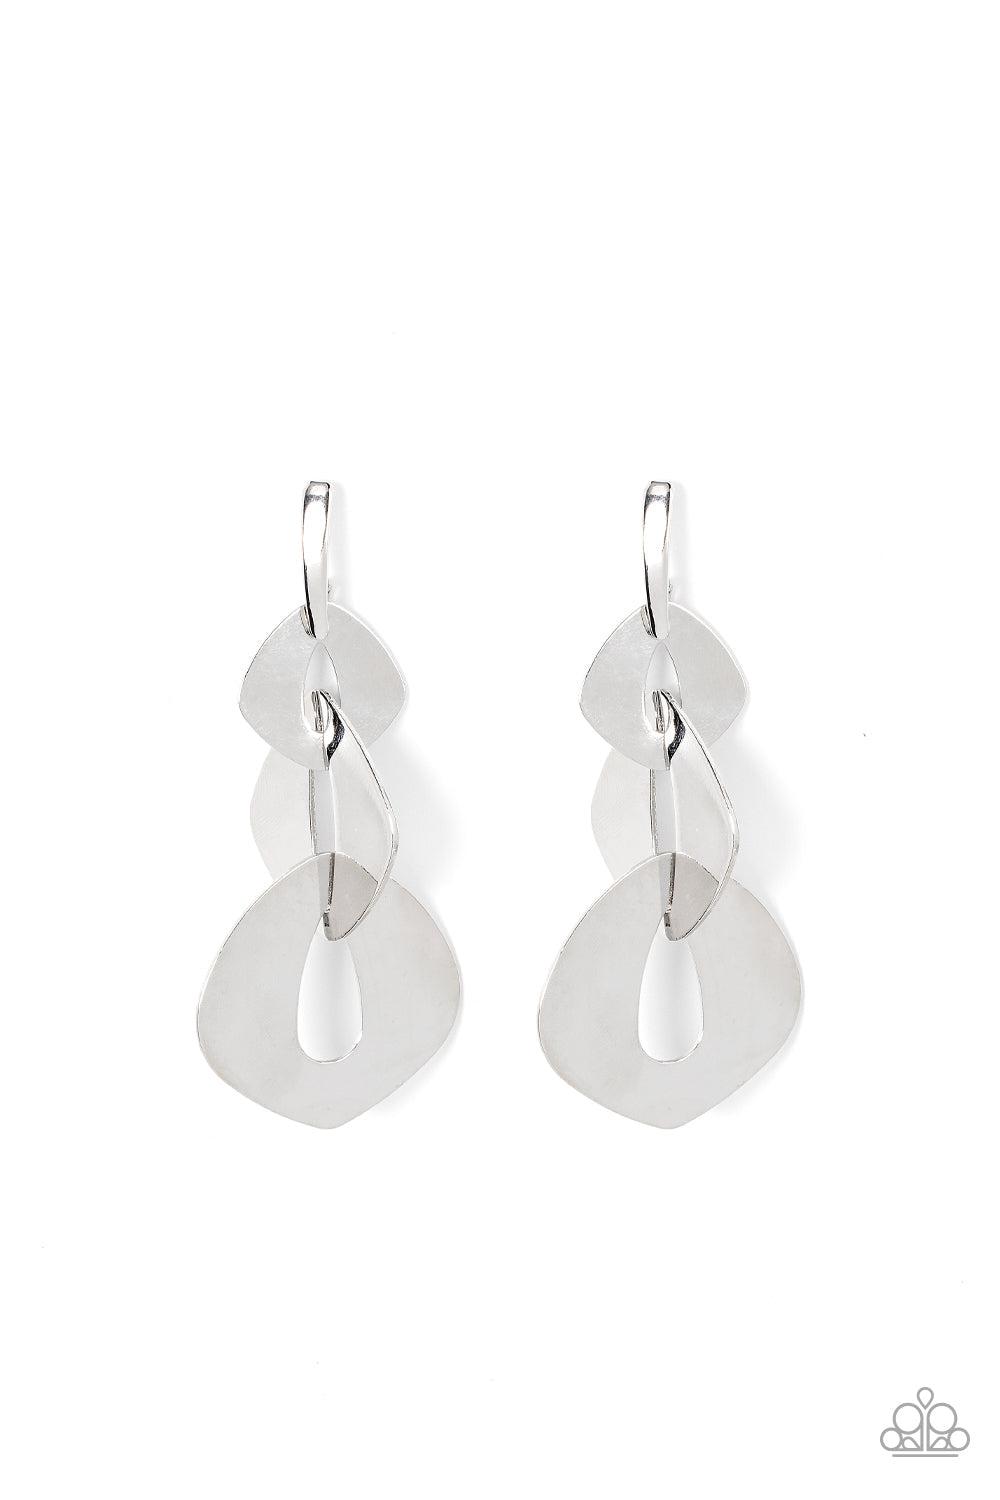 Enveloped in Edge Silver Earrings - Paparazzi Accessories- lightbox - CarasShop.com - $5 Jewelry by Cara Jewels